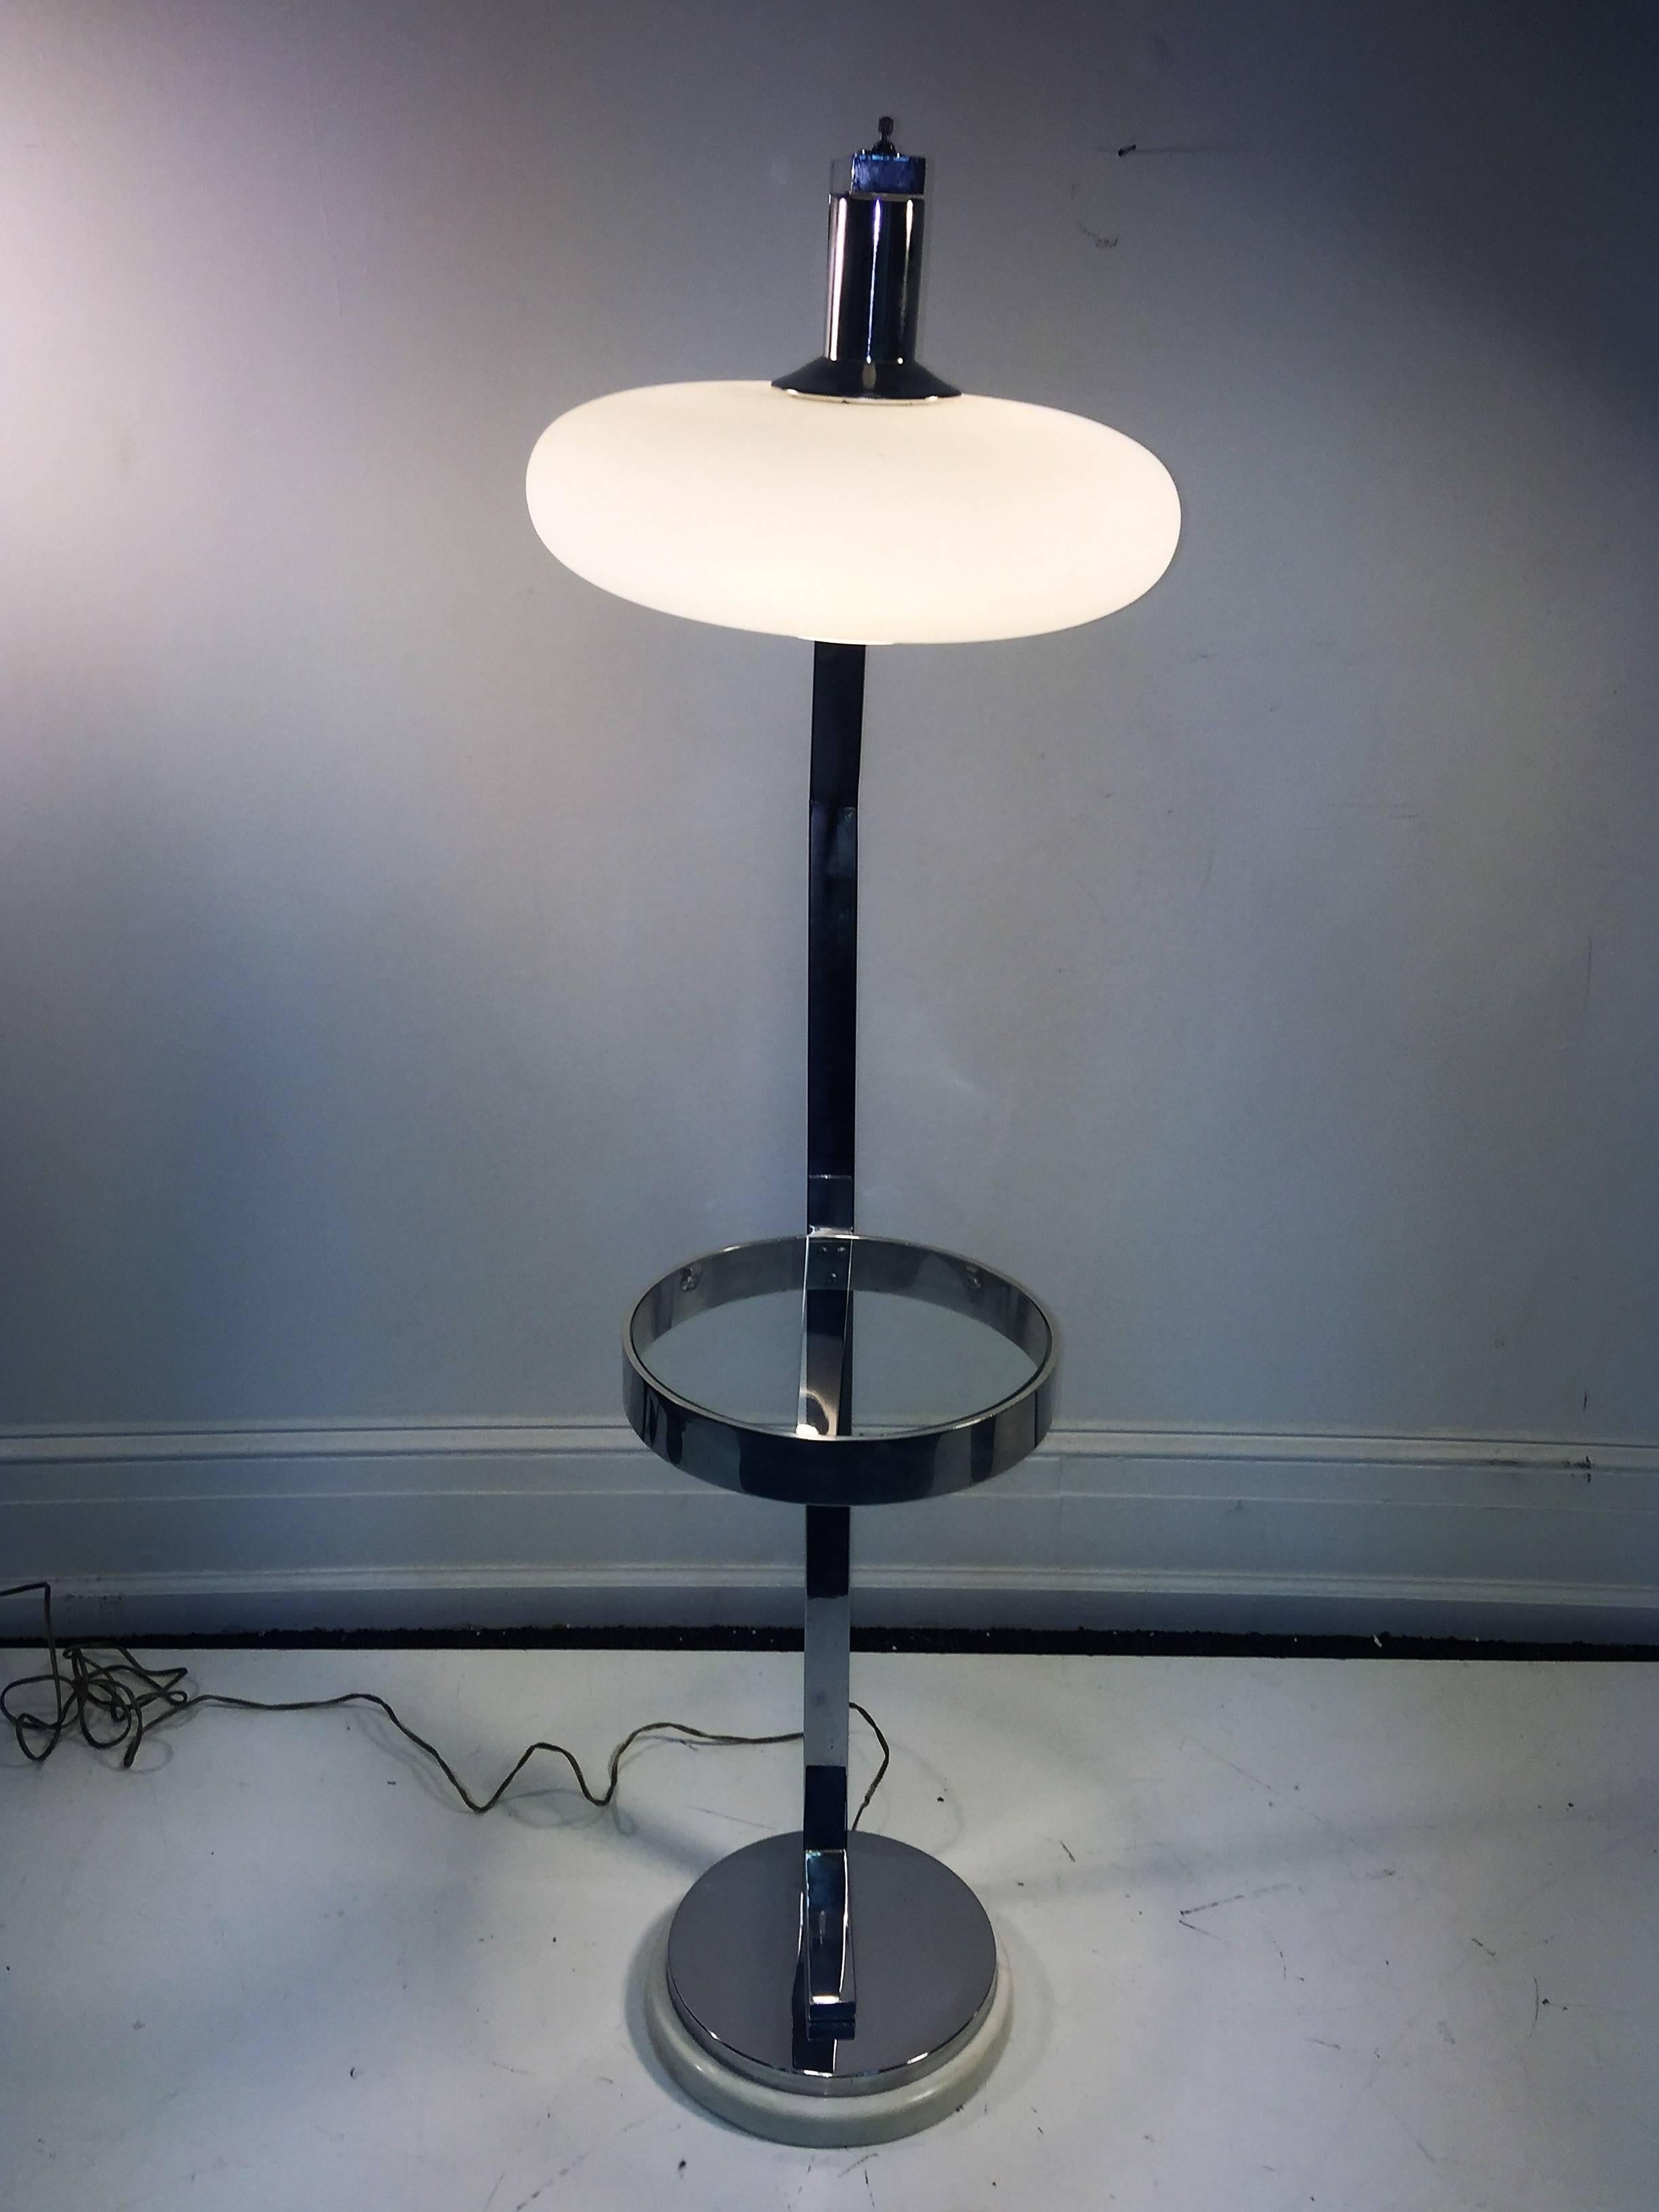 Striking design Italian floor lamp with white frosted glass shade and circular glass table attached to the center of the lamp. Heavy and substantial chromed bronze frame mounted on Carrera marble base. Great as a reading lamp next to your Modern